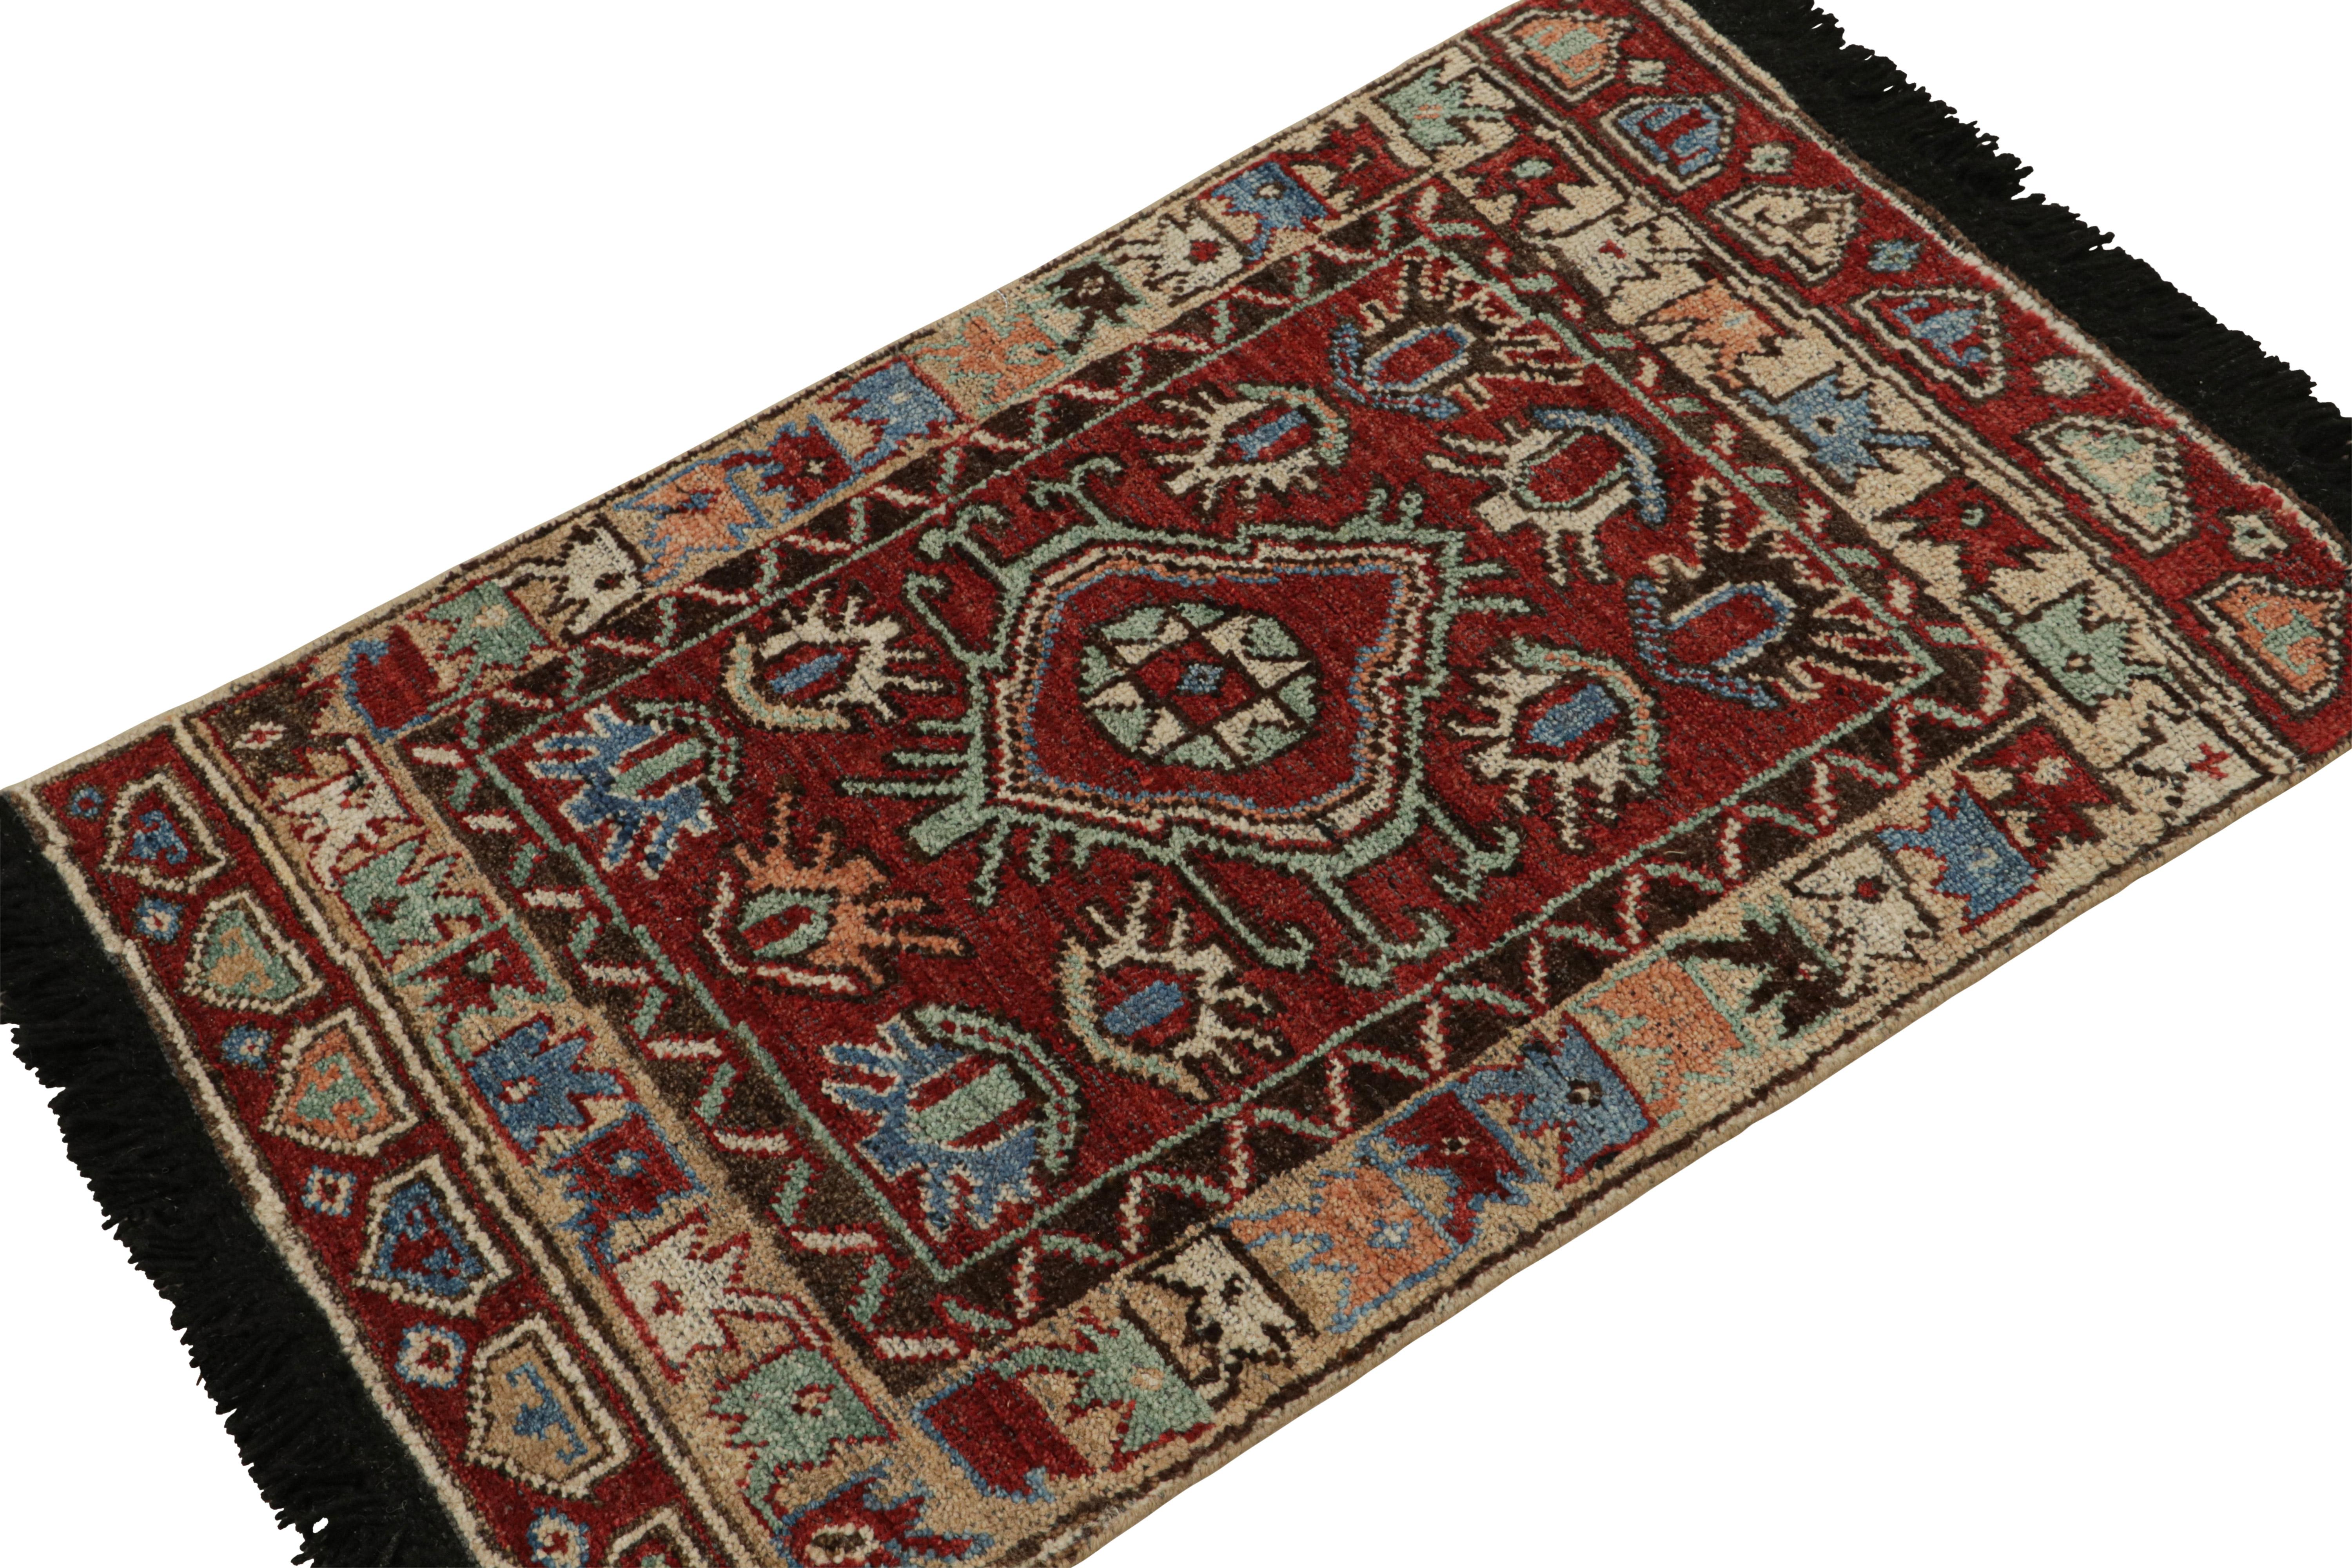 This 2x3 rug is a grand new entry to Rug & Kilim’s custom classics Burano collection. Hand-knotted in wool.

On the Design: 

This rug is inspired by antique tribal rugs & features primitivist geometric patterns in vibrant tones of red, blue,